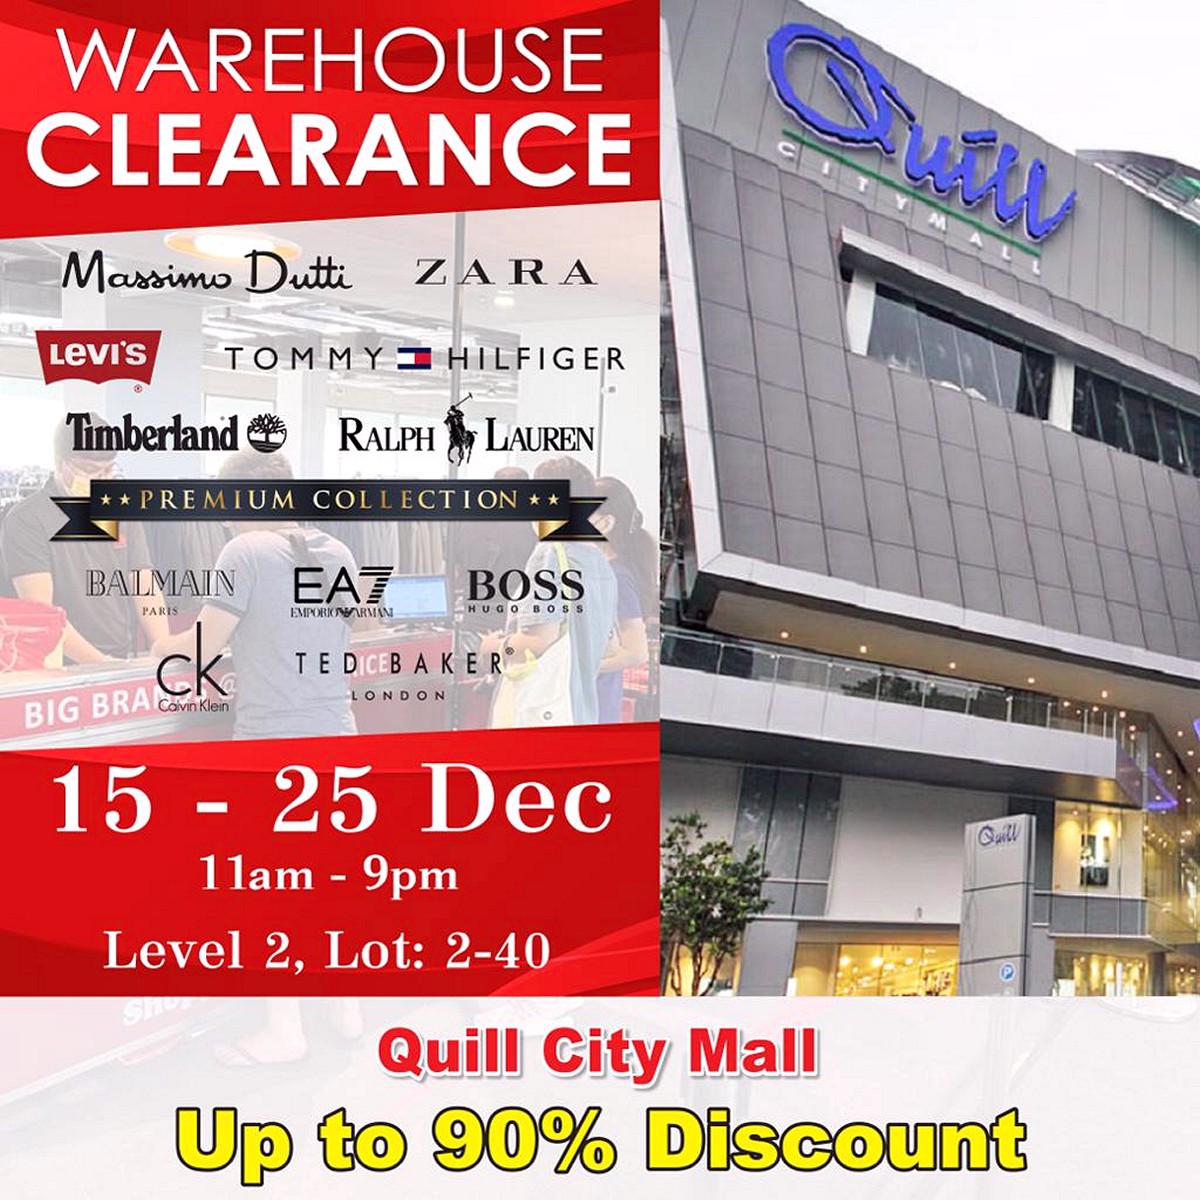 Shoppers-Hub-Christmas-Warehouse-Sale-2023-Quill-City-Mall-Clearance-Gift-Premium-Fashion-Branded - Apparels Bags Fashion Accessories Fashion Lifestyle & Department Store Footwear Handbags Kuala Lumpur Selangor Sportswear Wallets Warehouse Sale & Clearance in Malaysia 